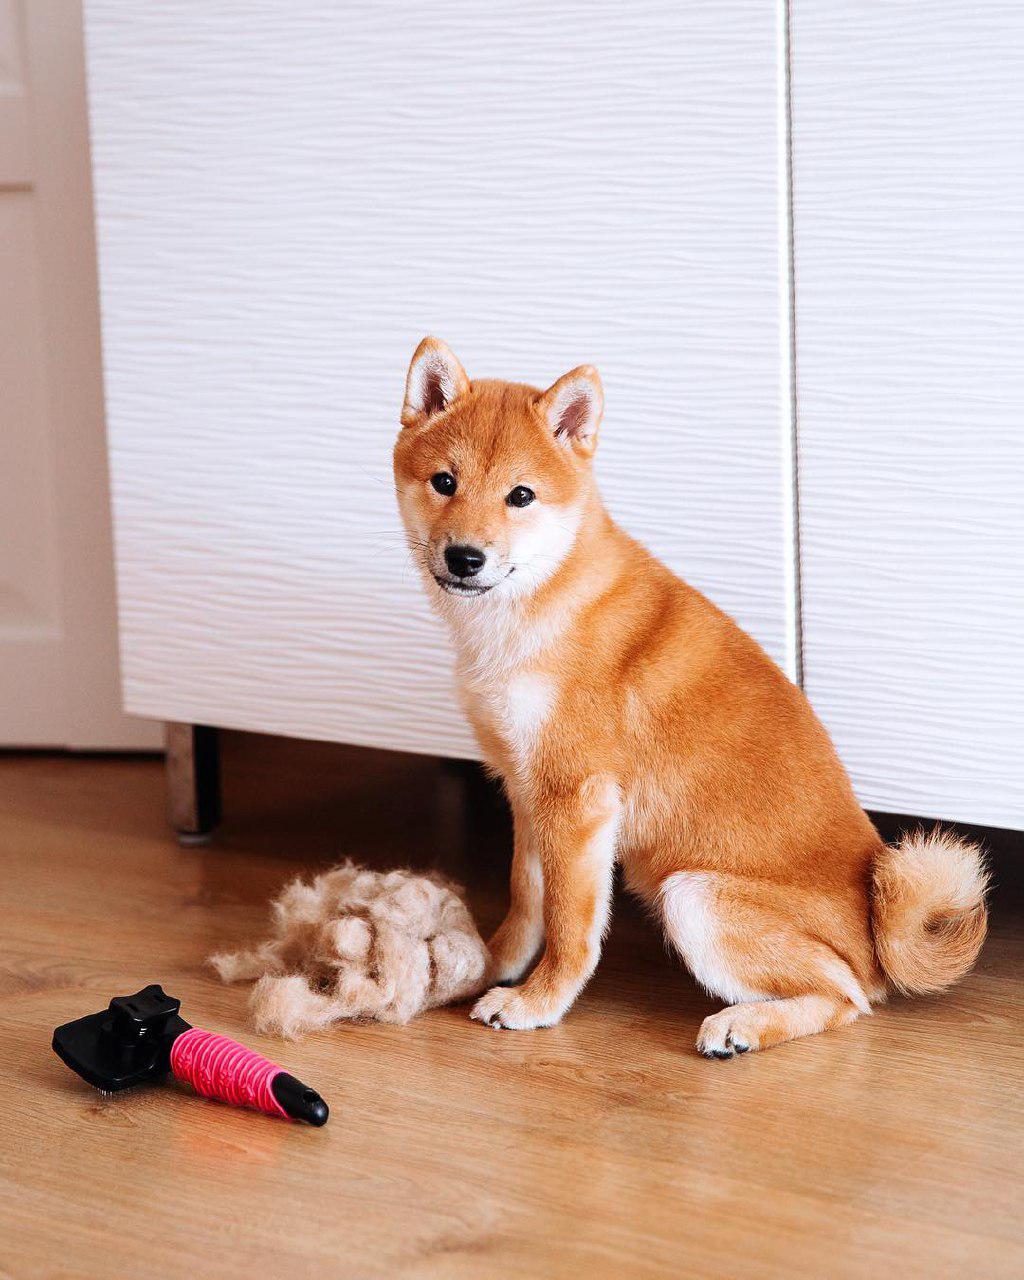 A Shiba Inu sitting on the floor with a it shed fur and comb in front of him